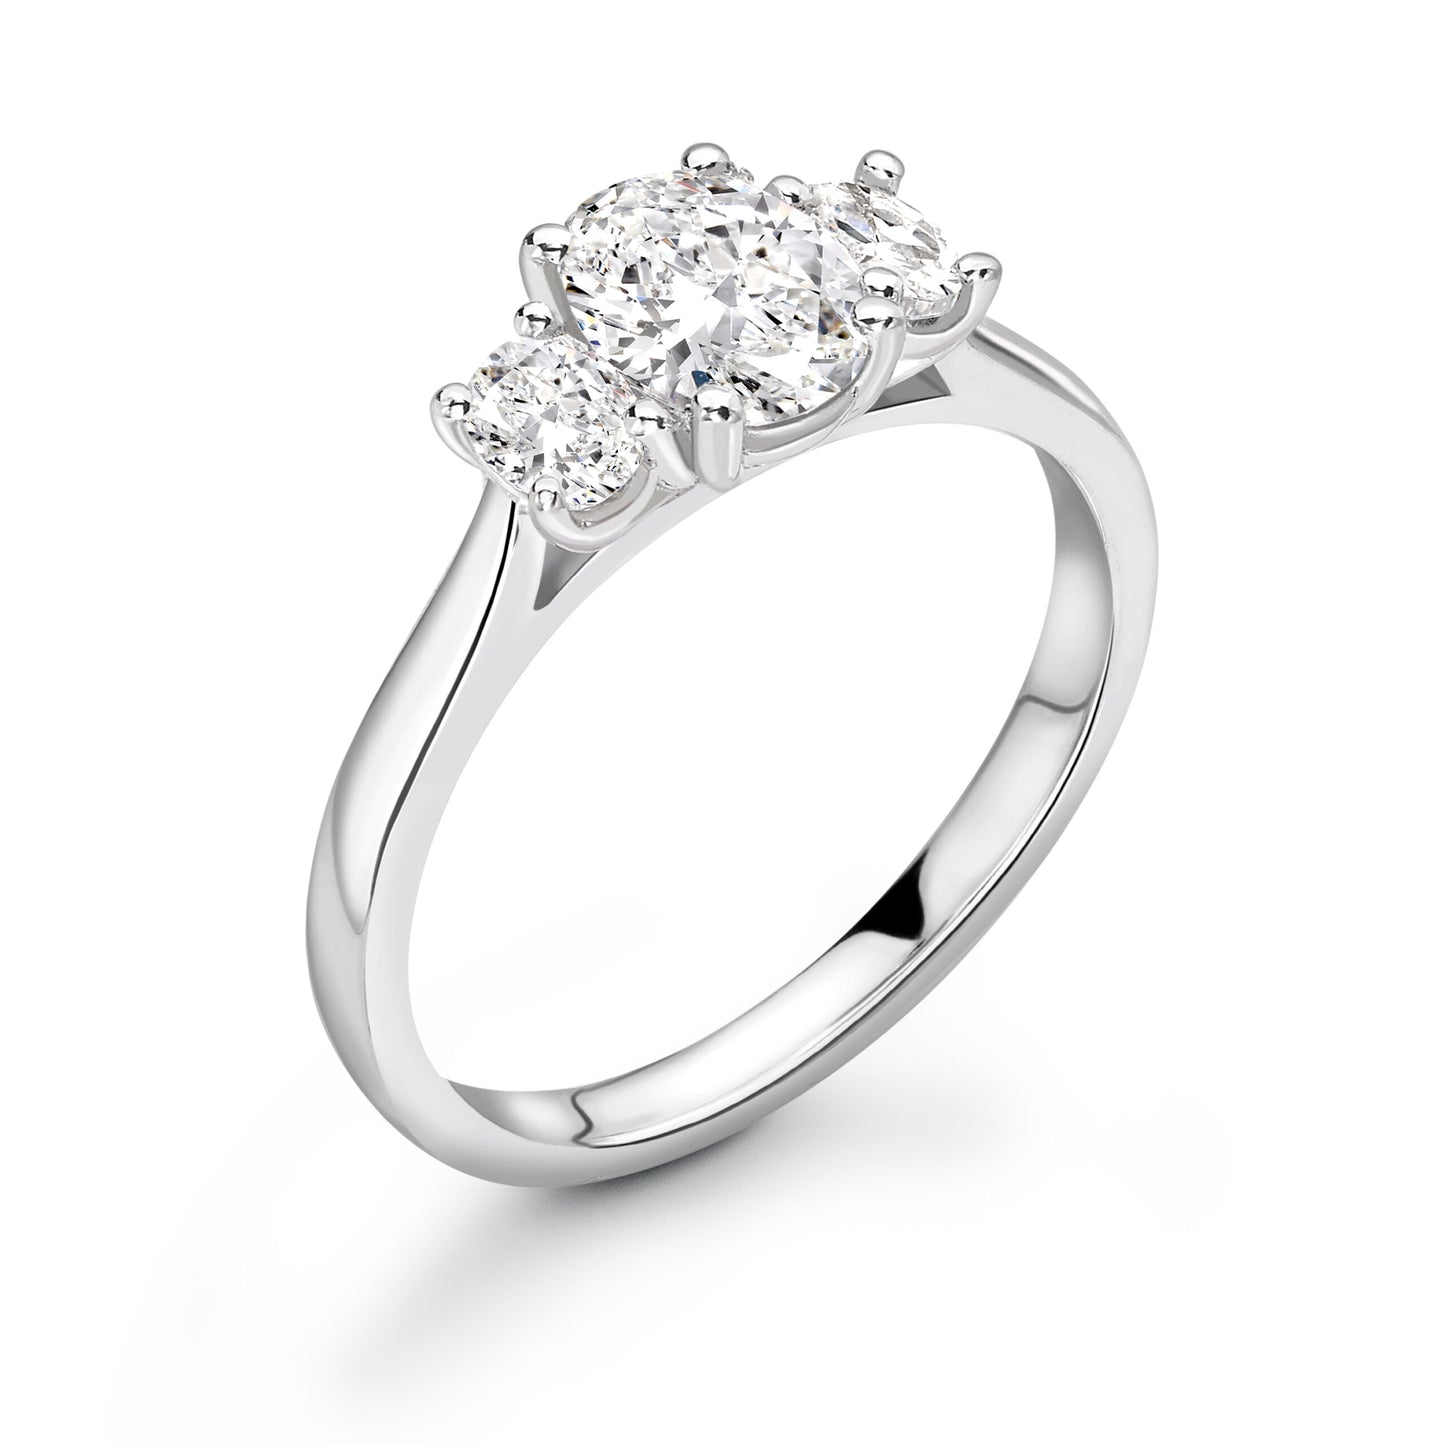 Oval Trilogy Diamond ring in White Gold